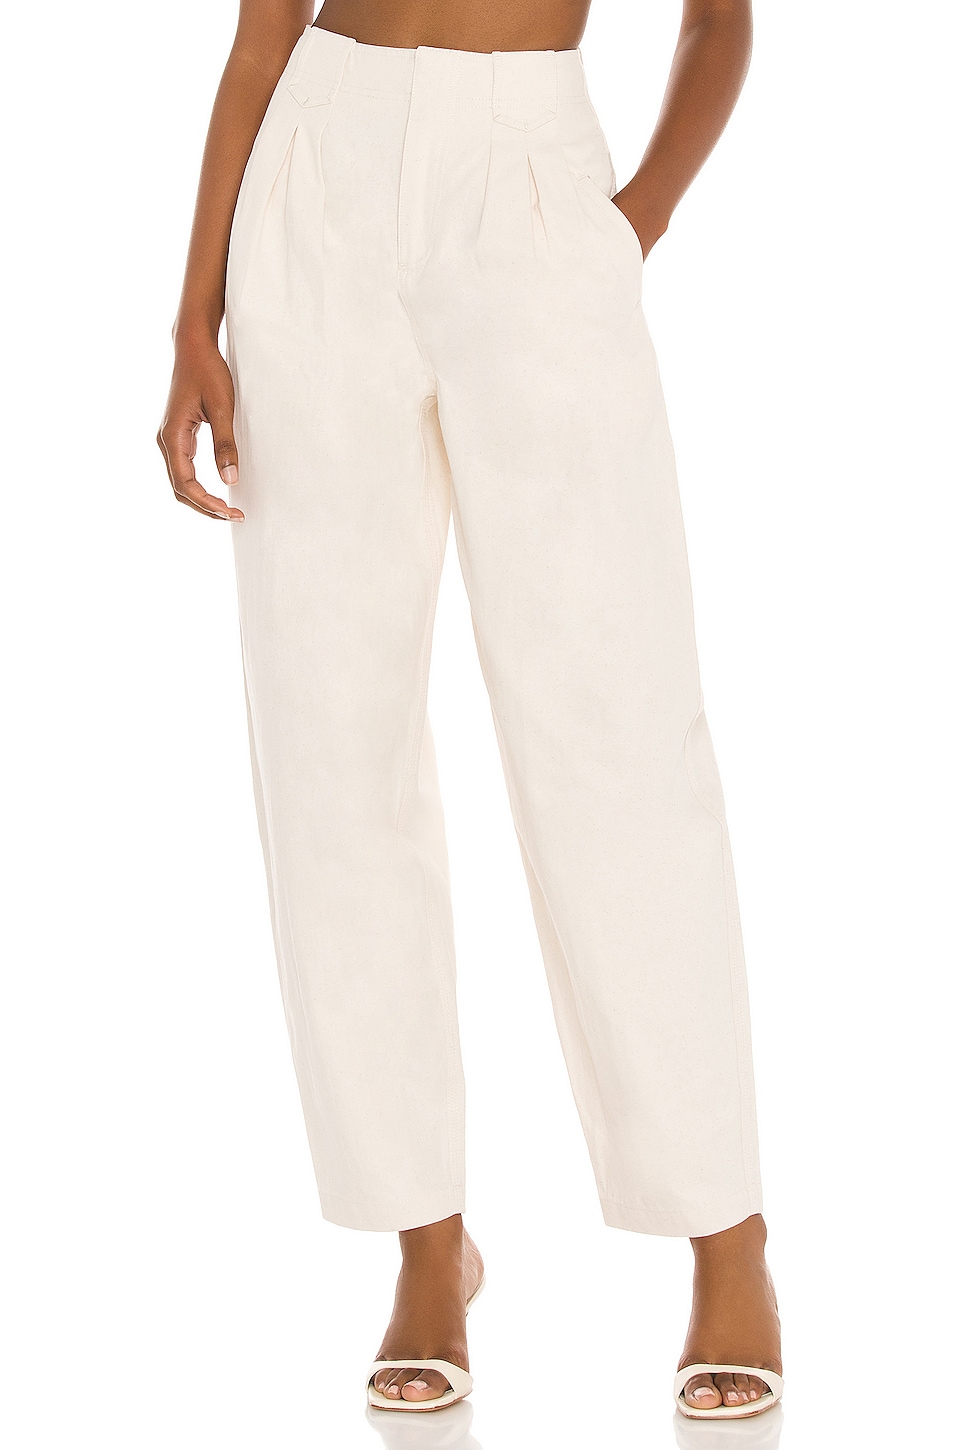 Song of Style Quinn Pant in Cream | REVOLVE